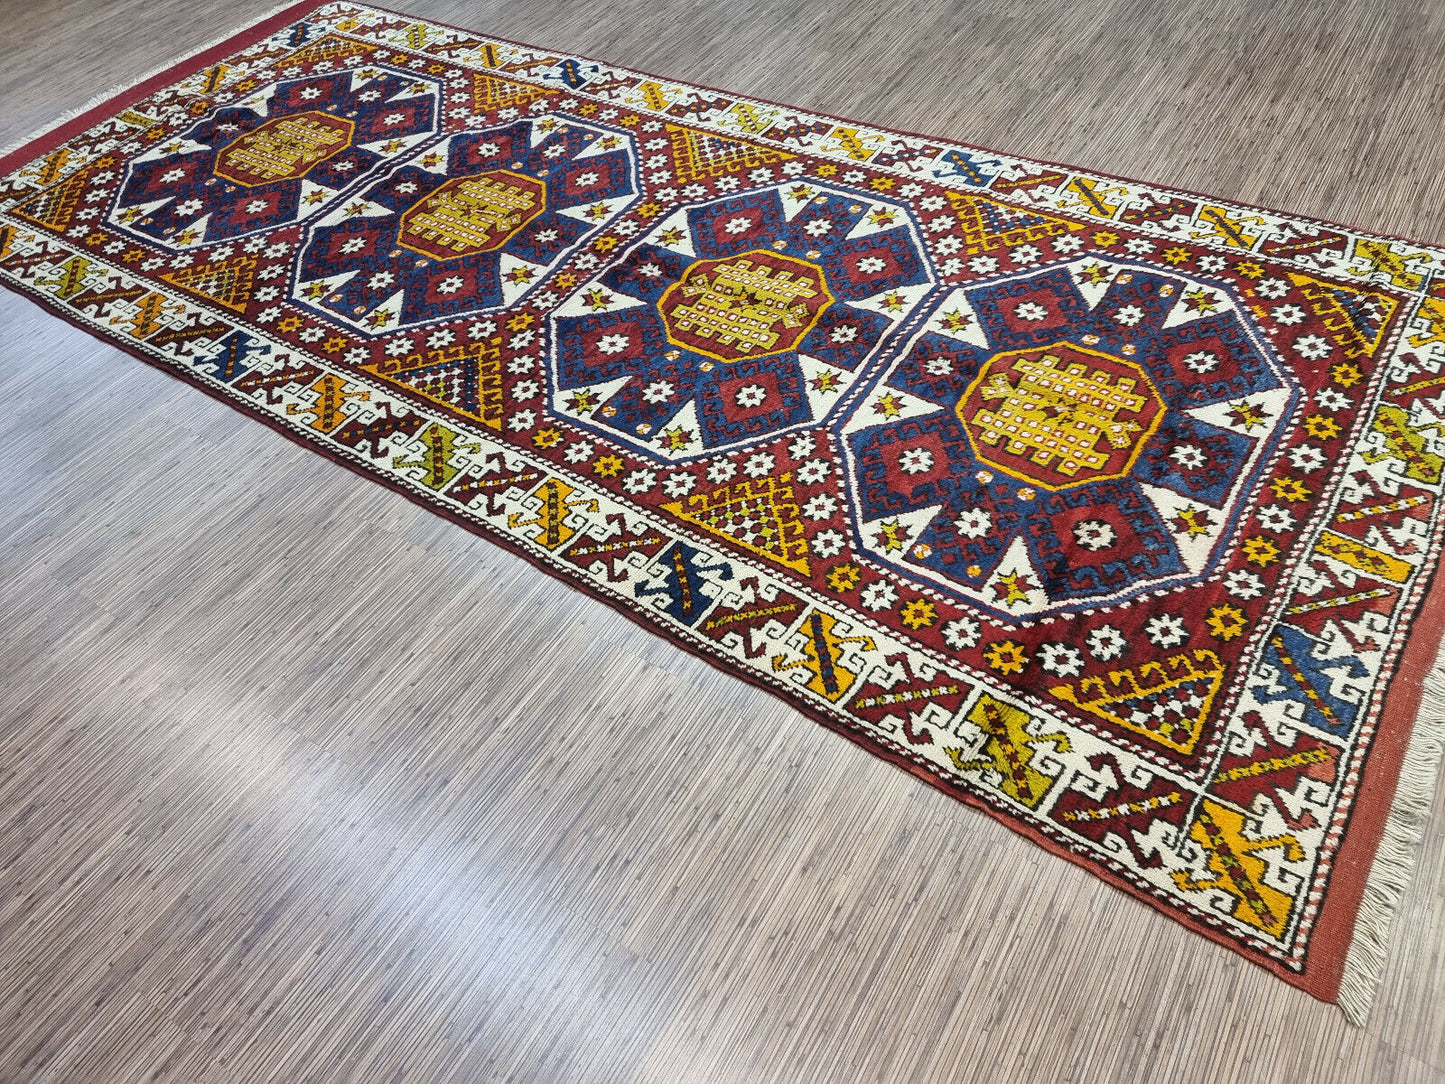 Artistic display of the Handmade Antique Turkish Anatolian Runner Rug defining a narrow space